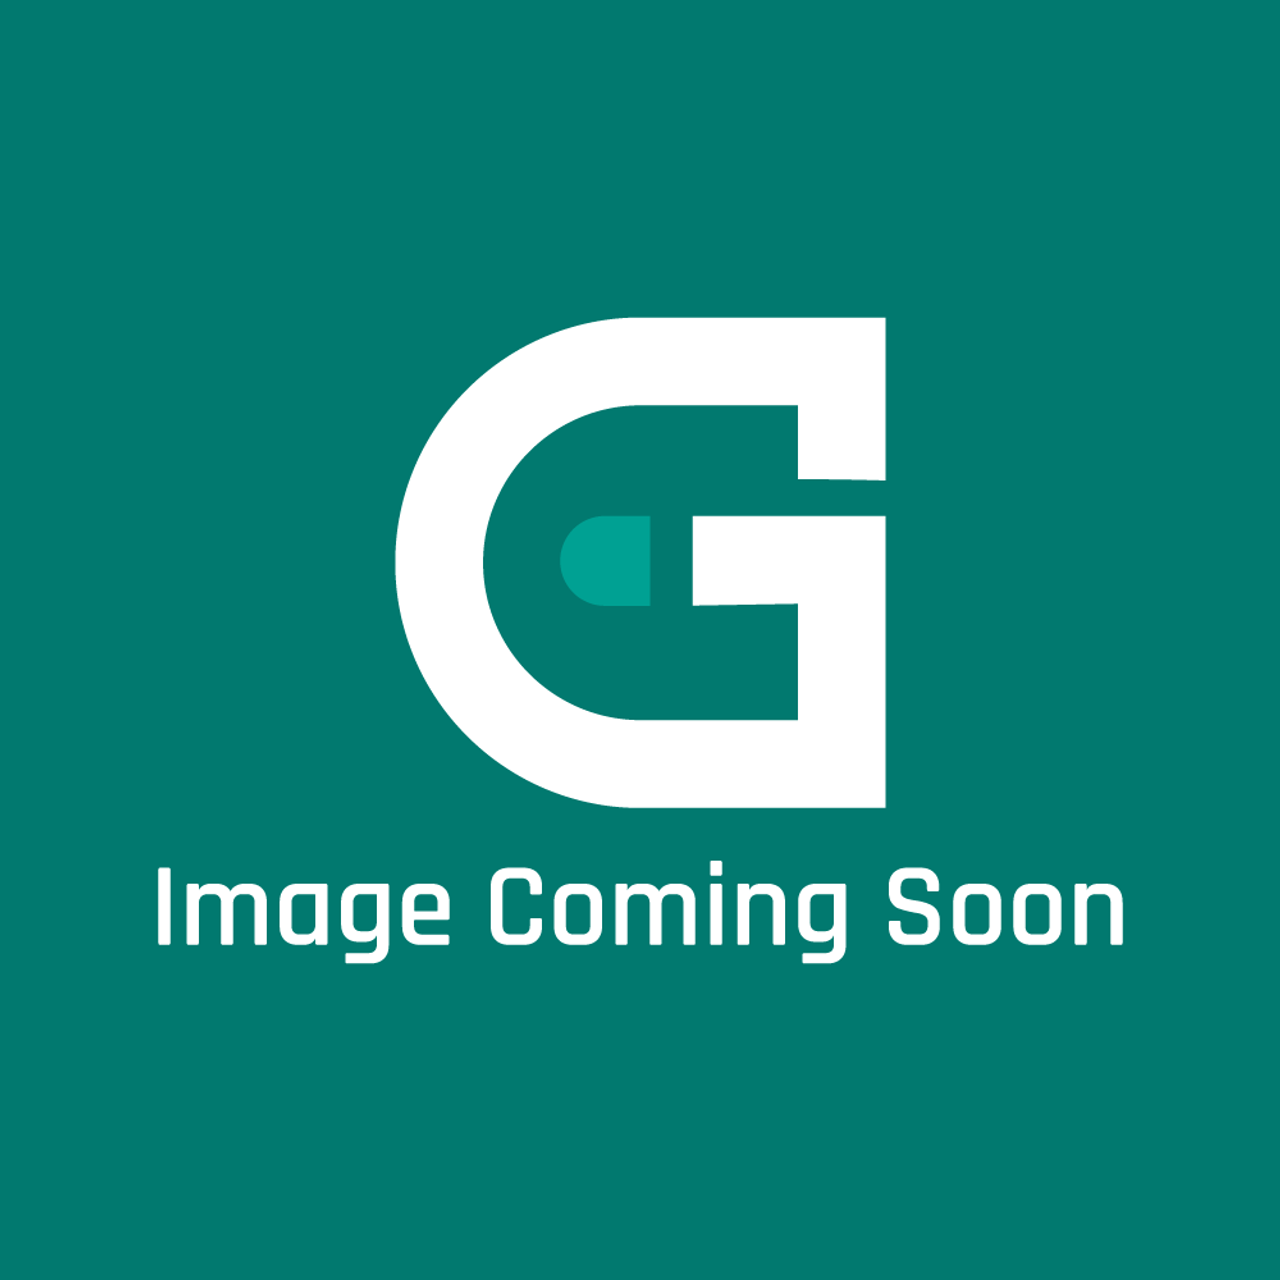 Delfield 1702210 - Gasket, S/S 1/2 Dr, Slh - Image Coming Soon!